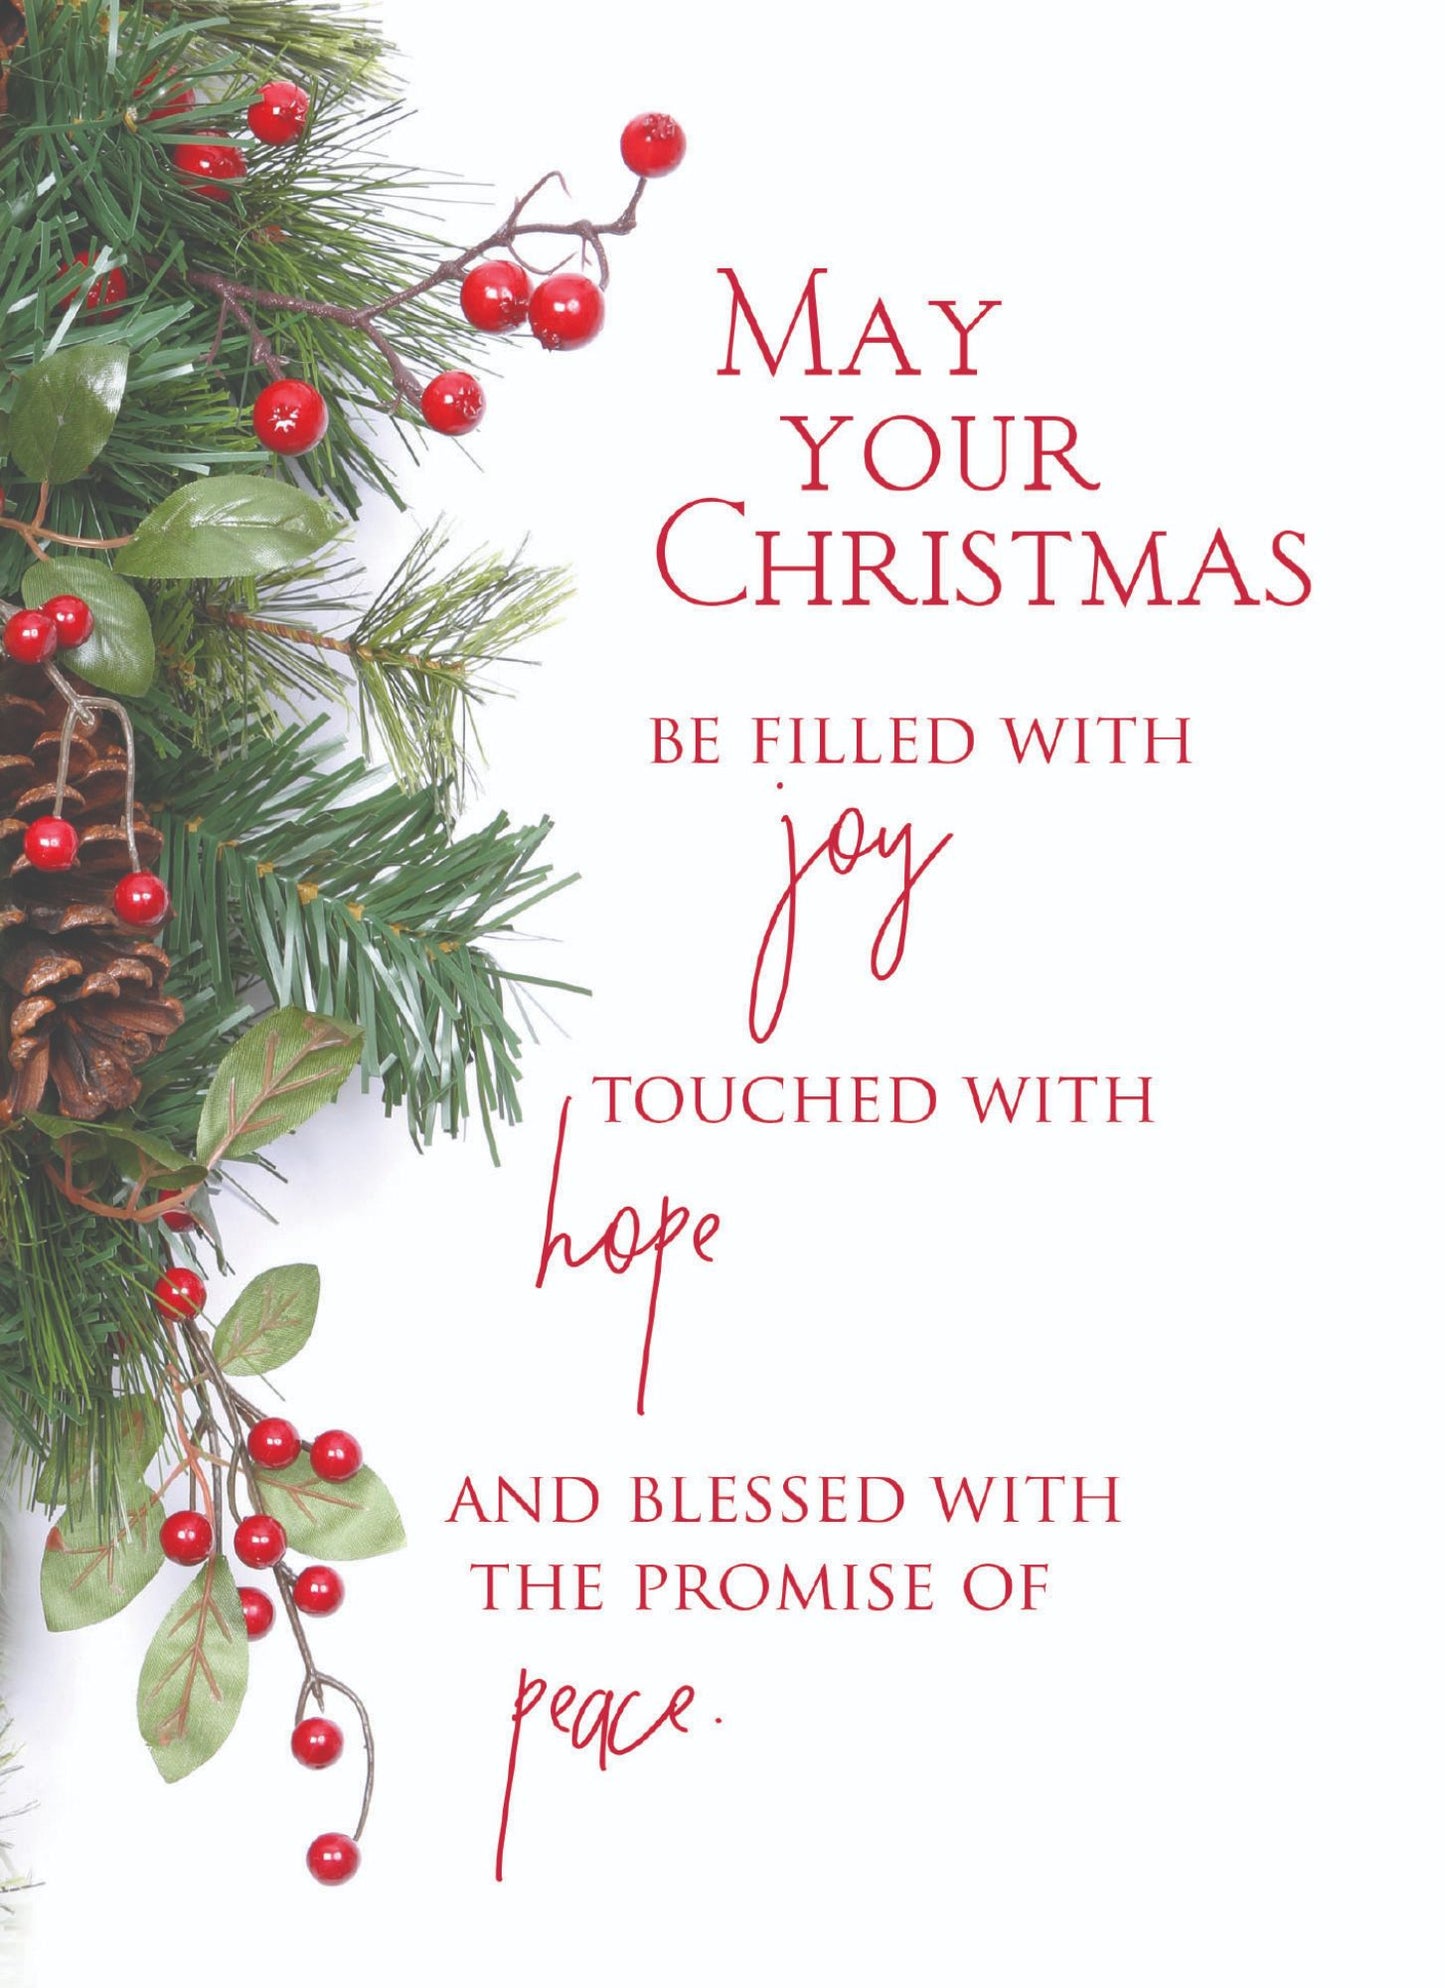 Boxed Christmas Cards - Blessings, 12 NIV Cards and Envelopes